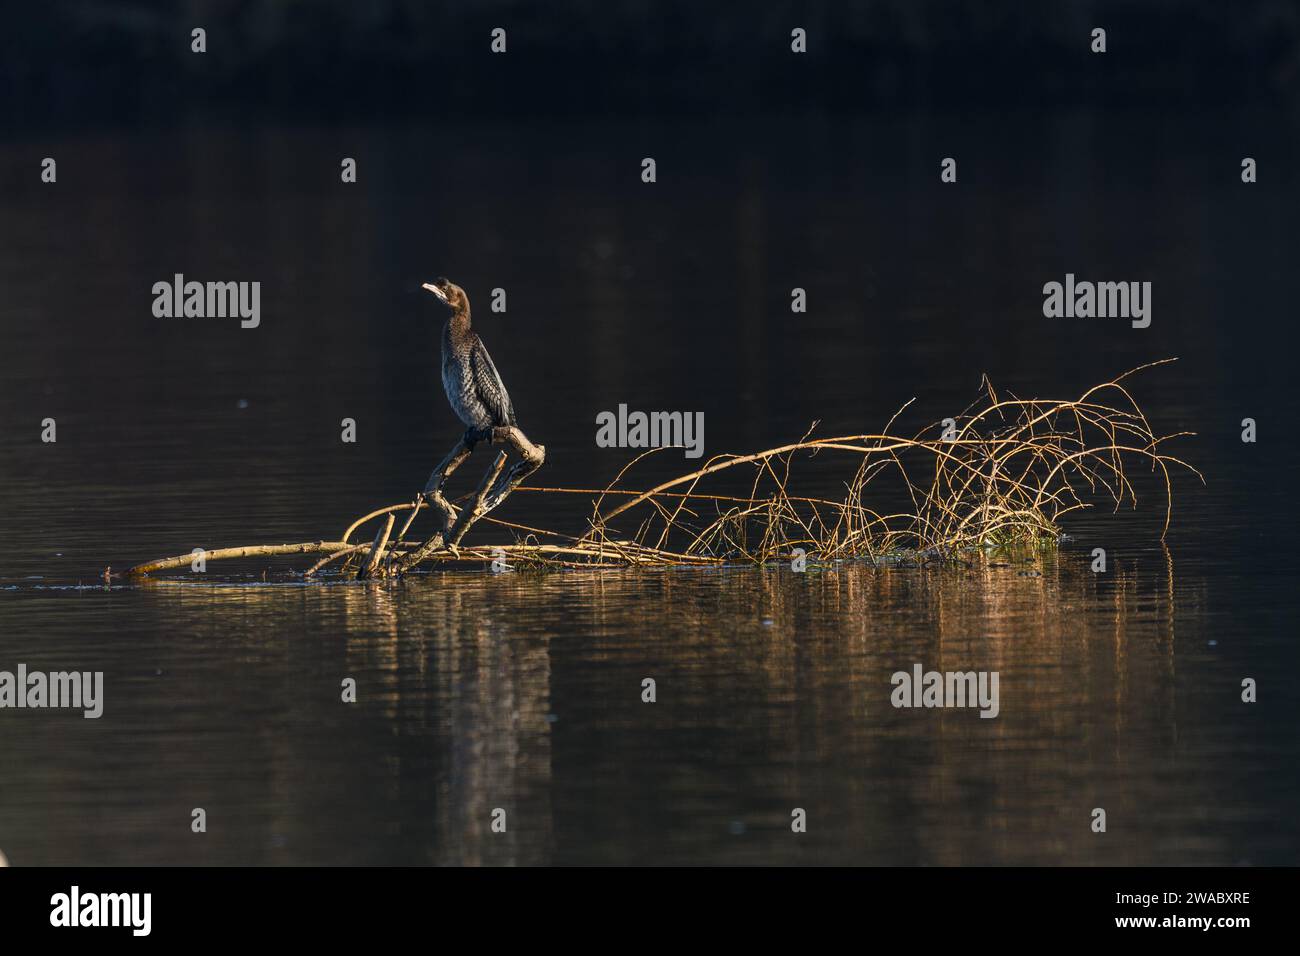 Pygmy cormorant (Microcarbo pygmaeus) perched on a branch in the water. Bas-Rhin, Alsace,Grand Est, France, Europe. Stock Photo